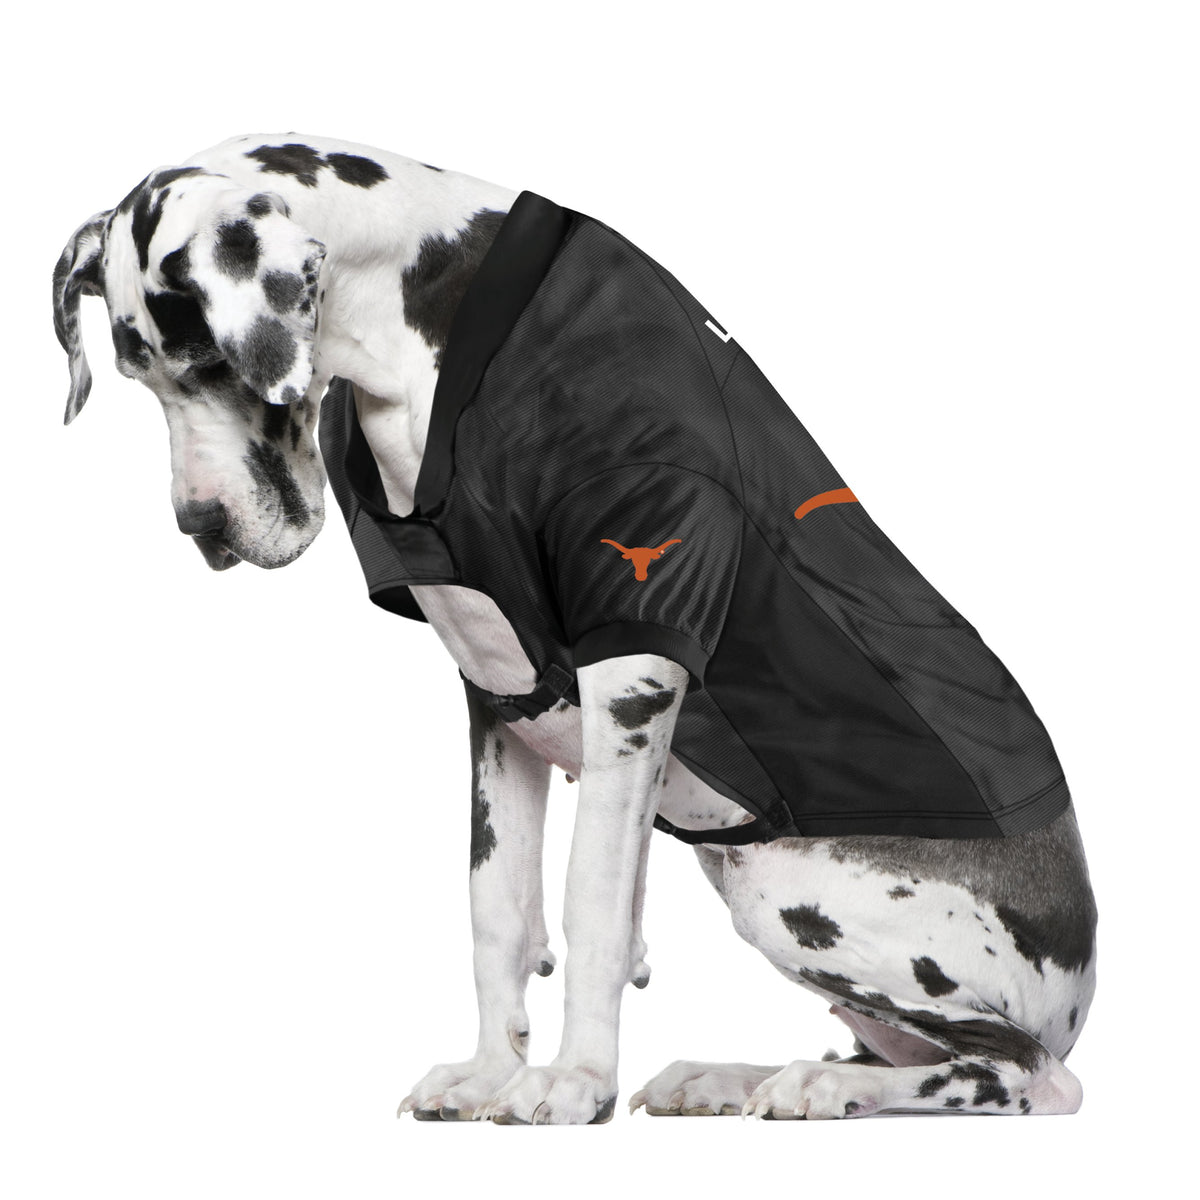 TX Longhorns Big Dog Stretch Jersey - 3 Red Rovers